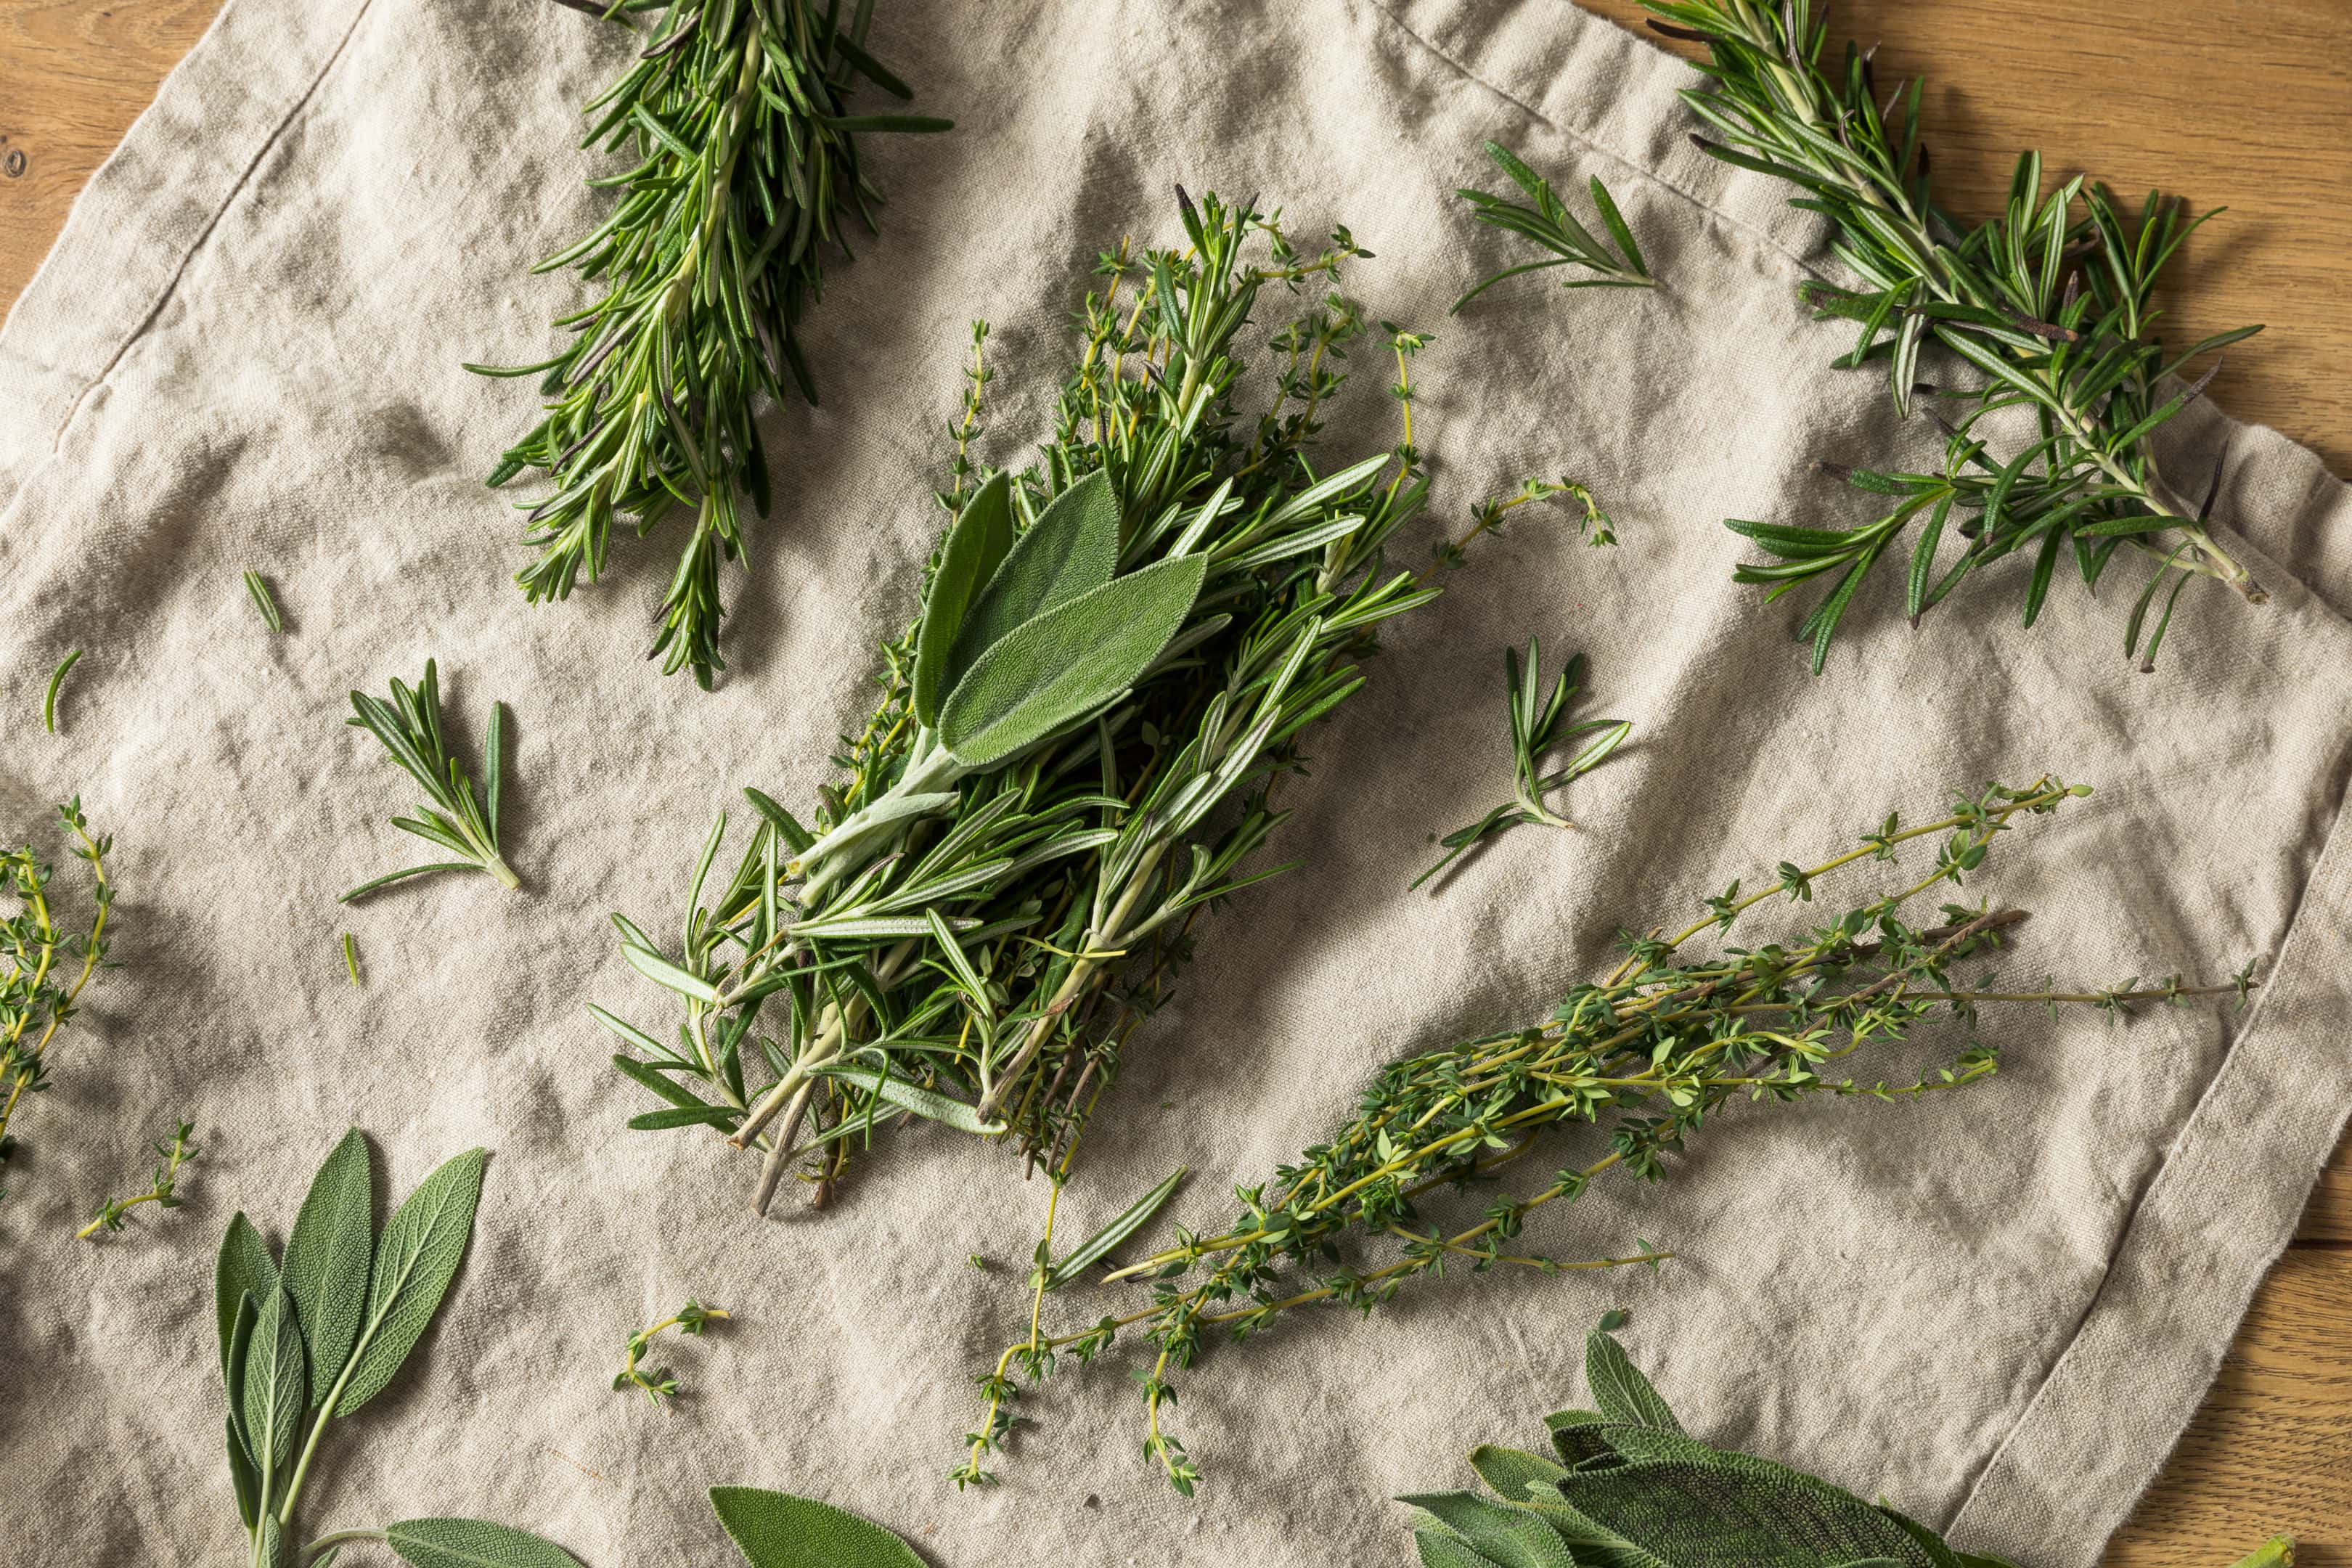 Raw green herbs: rosemary sage and thyme